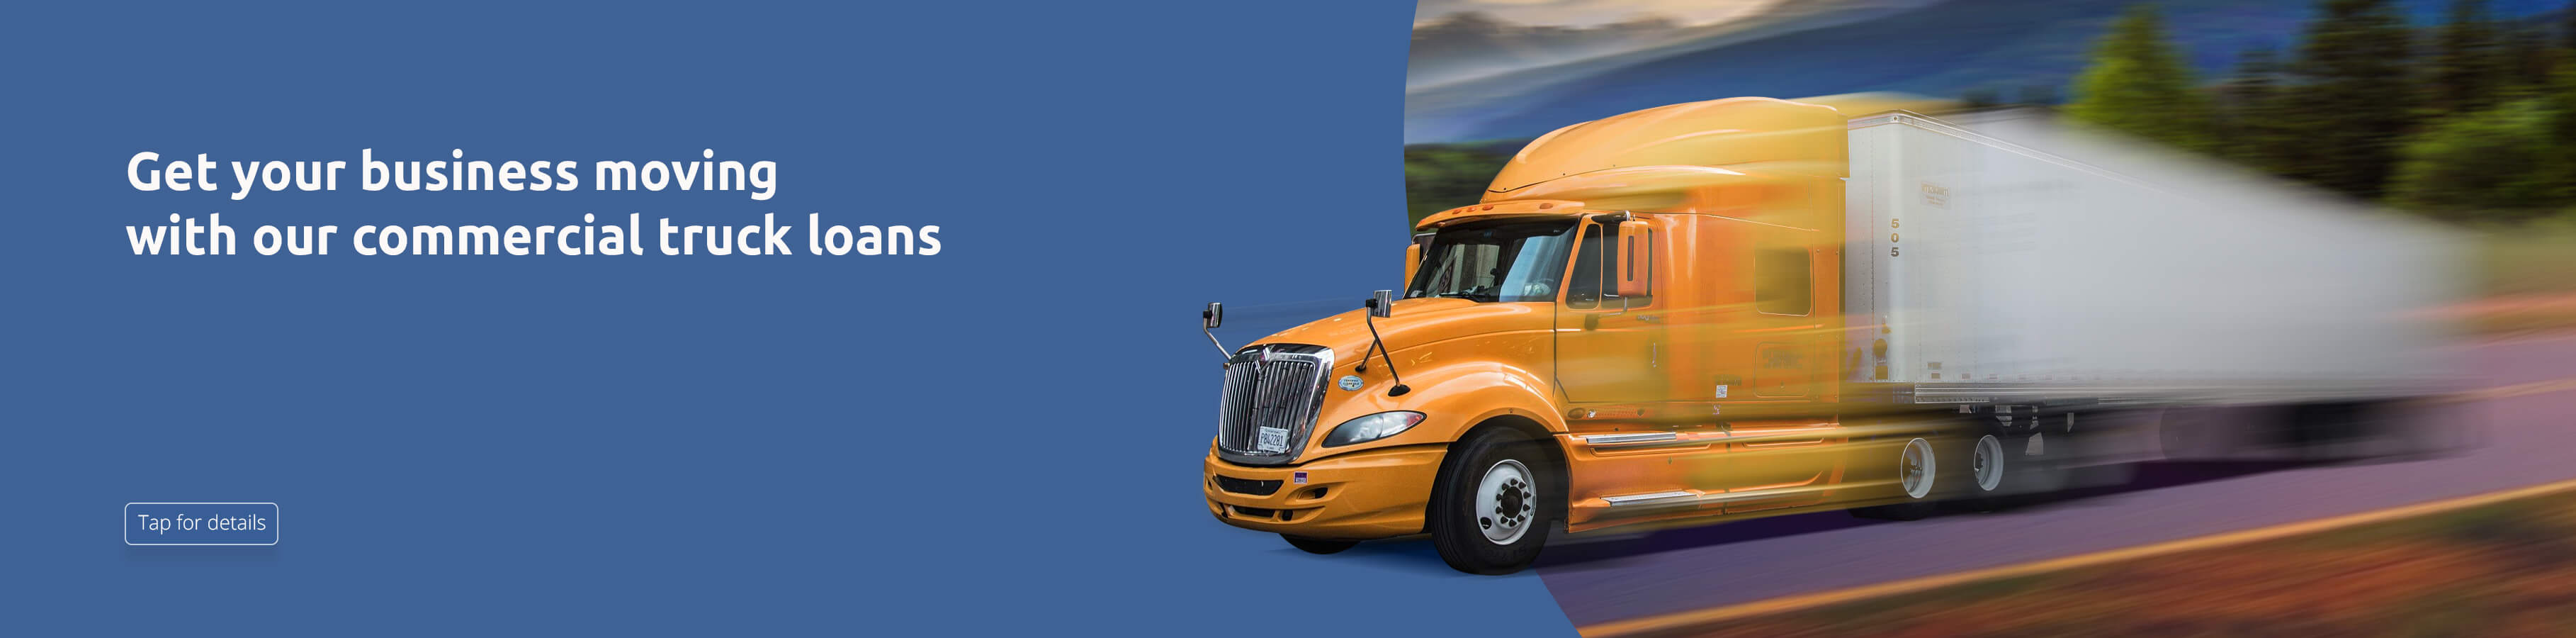 Get your business moving with our commercial truck loans. Tap for details. 